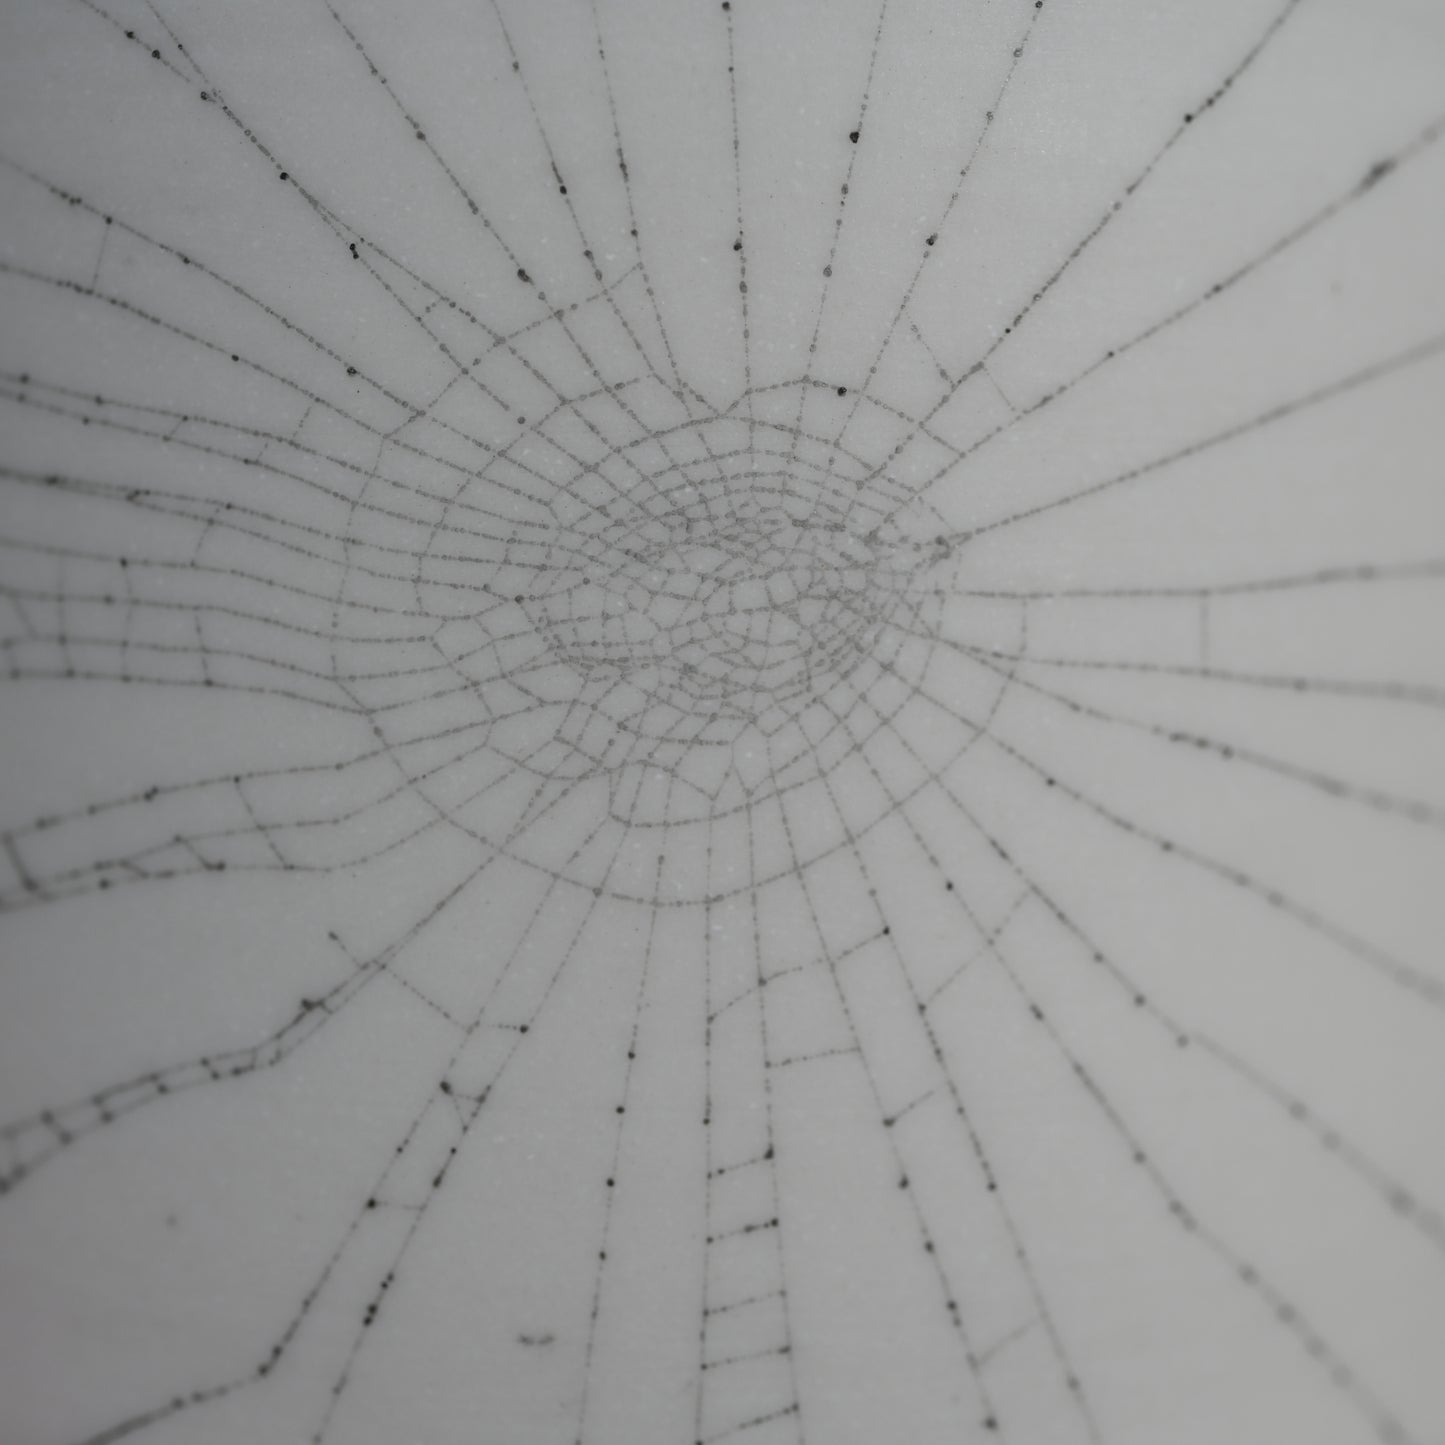 Web on Clay (092), Collected September 04, 2022